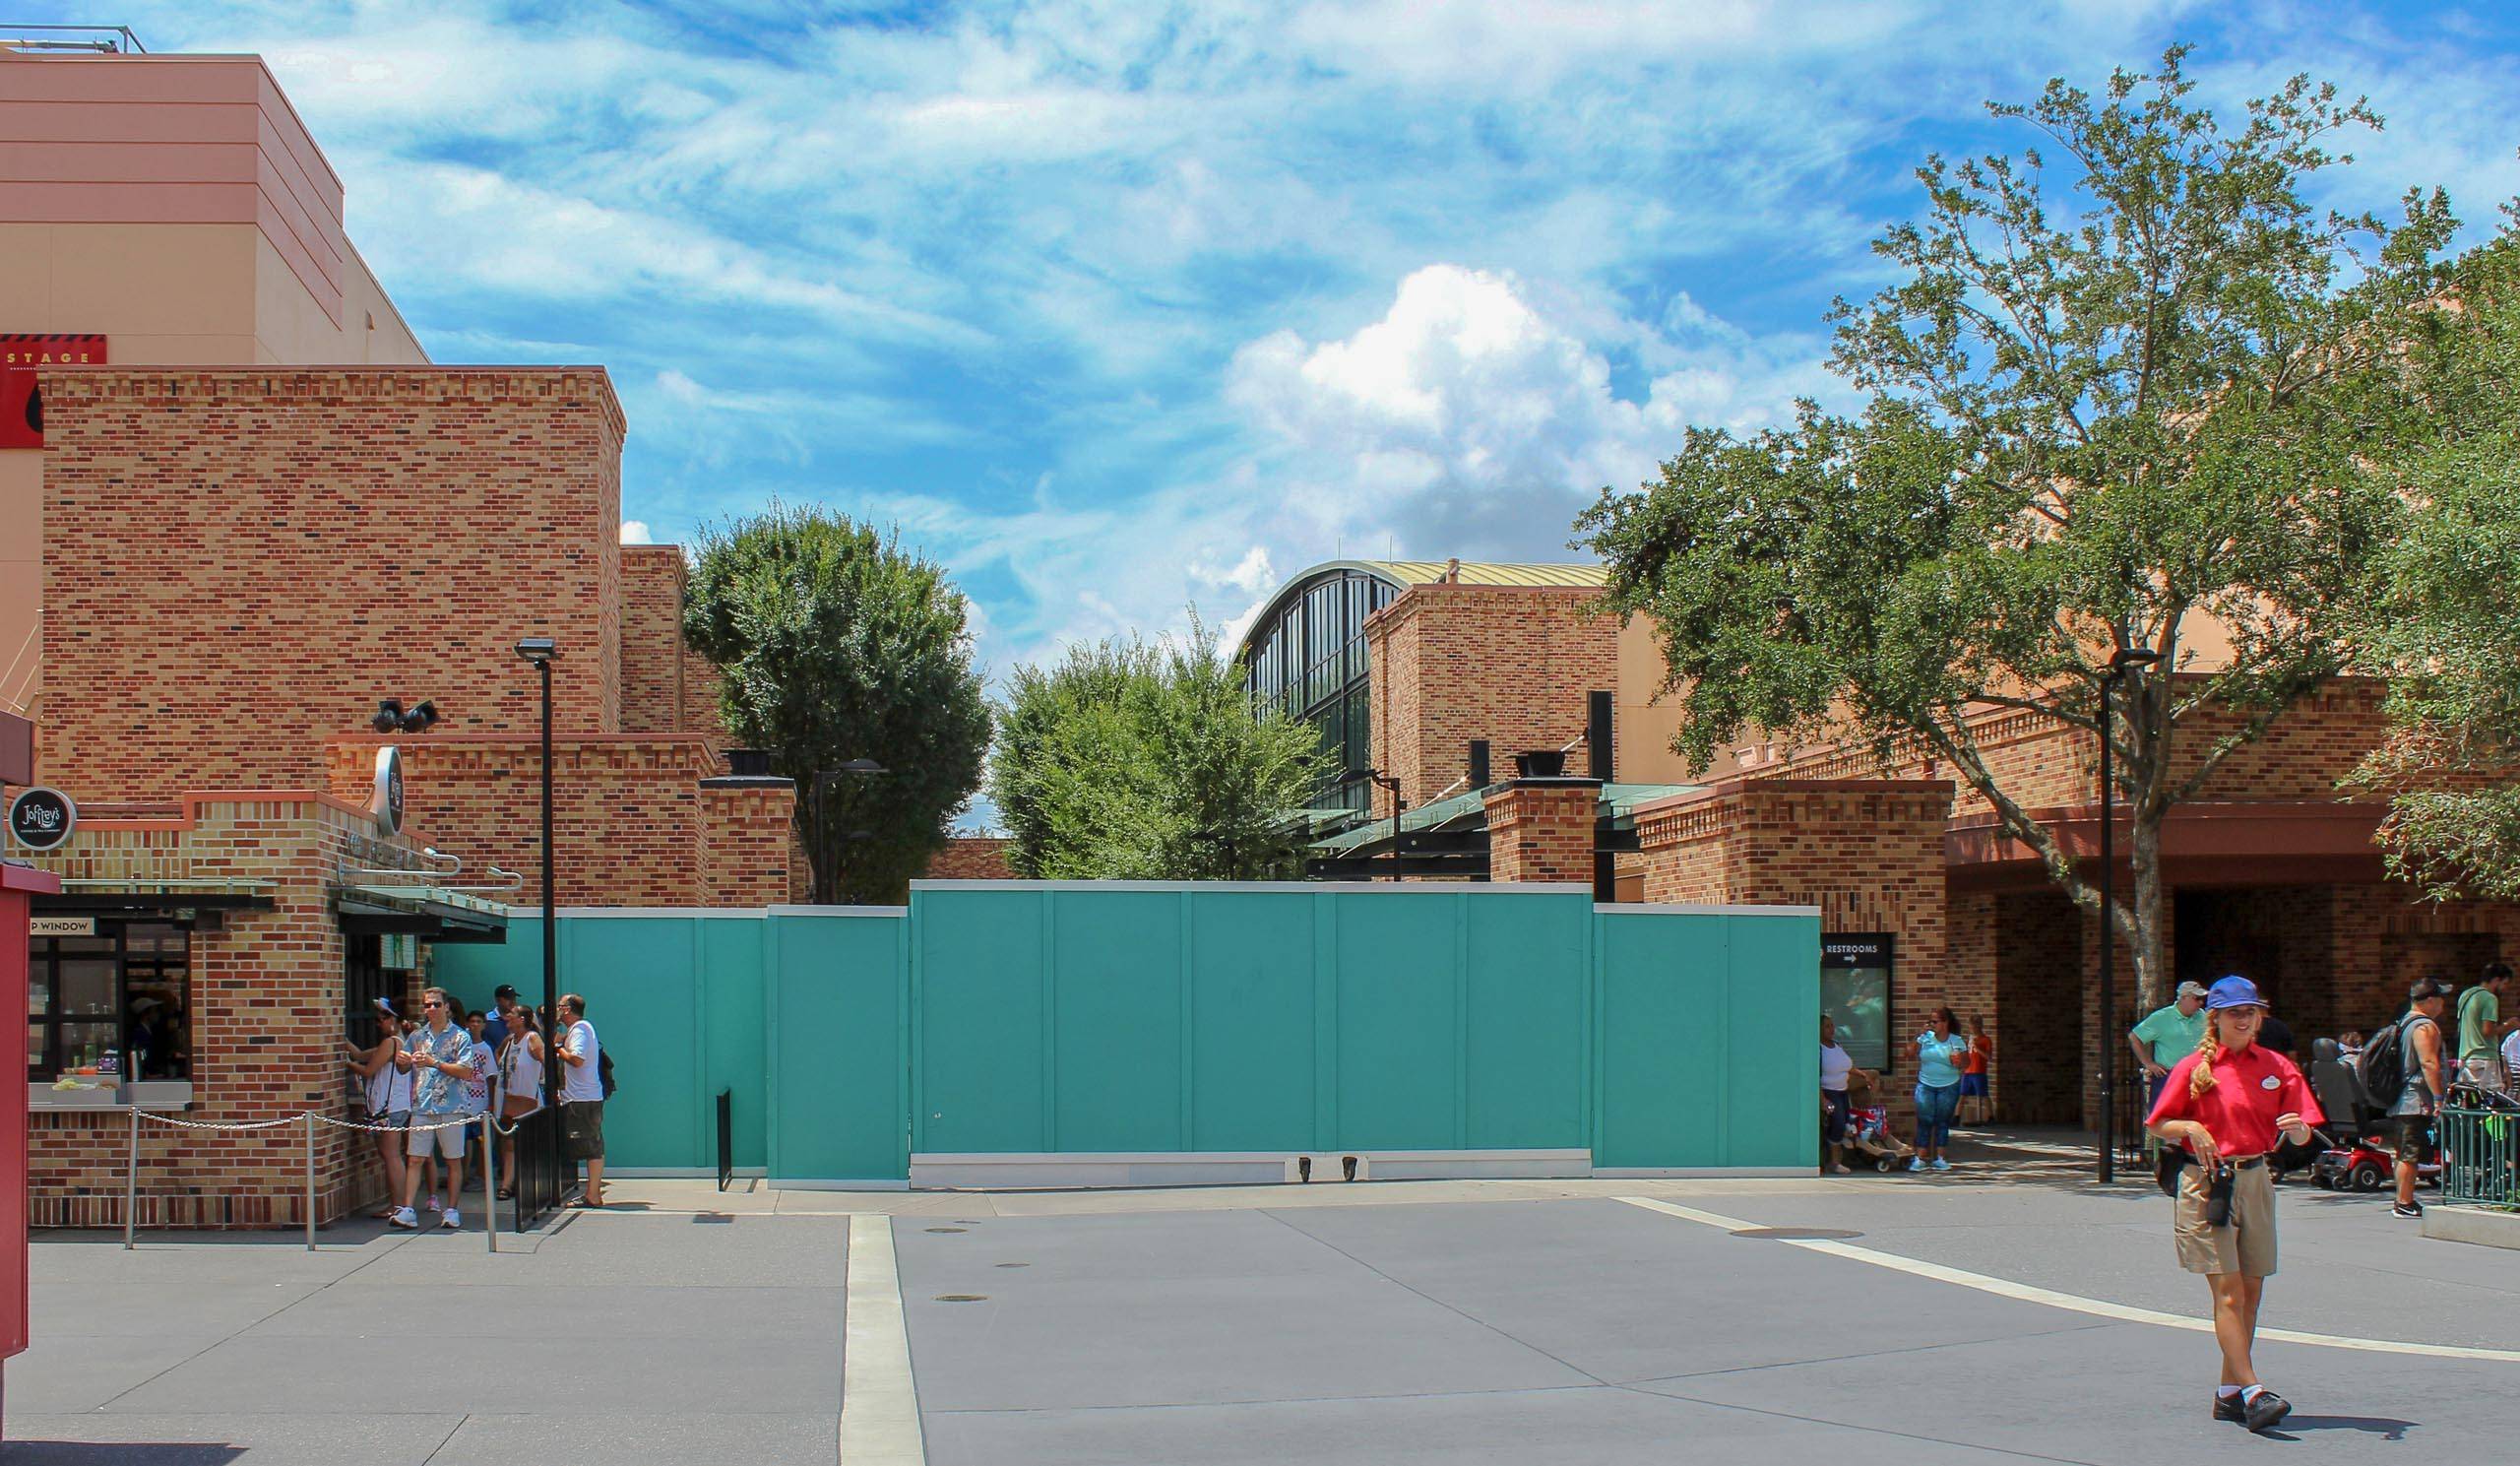 Pixar Place walled off